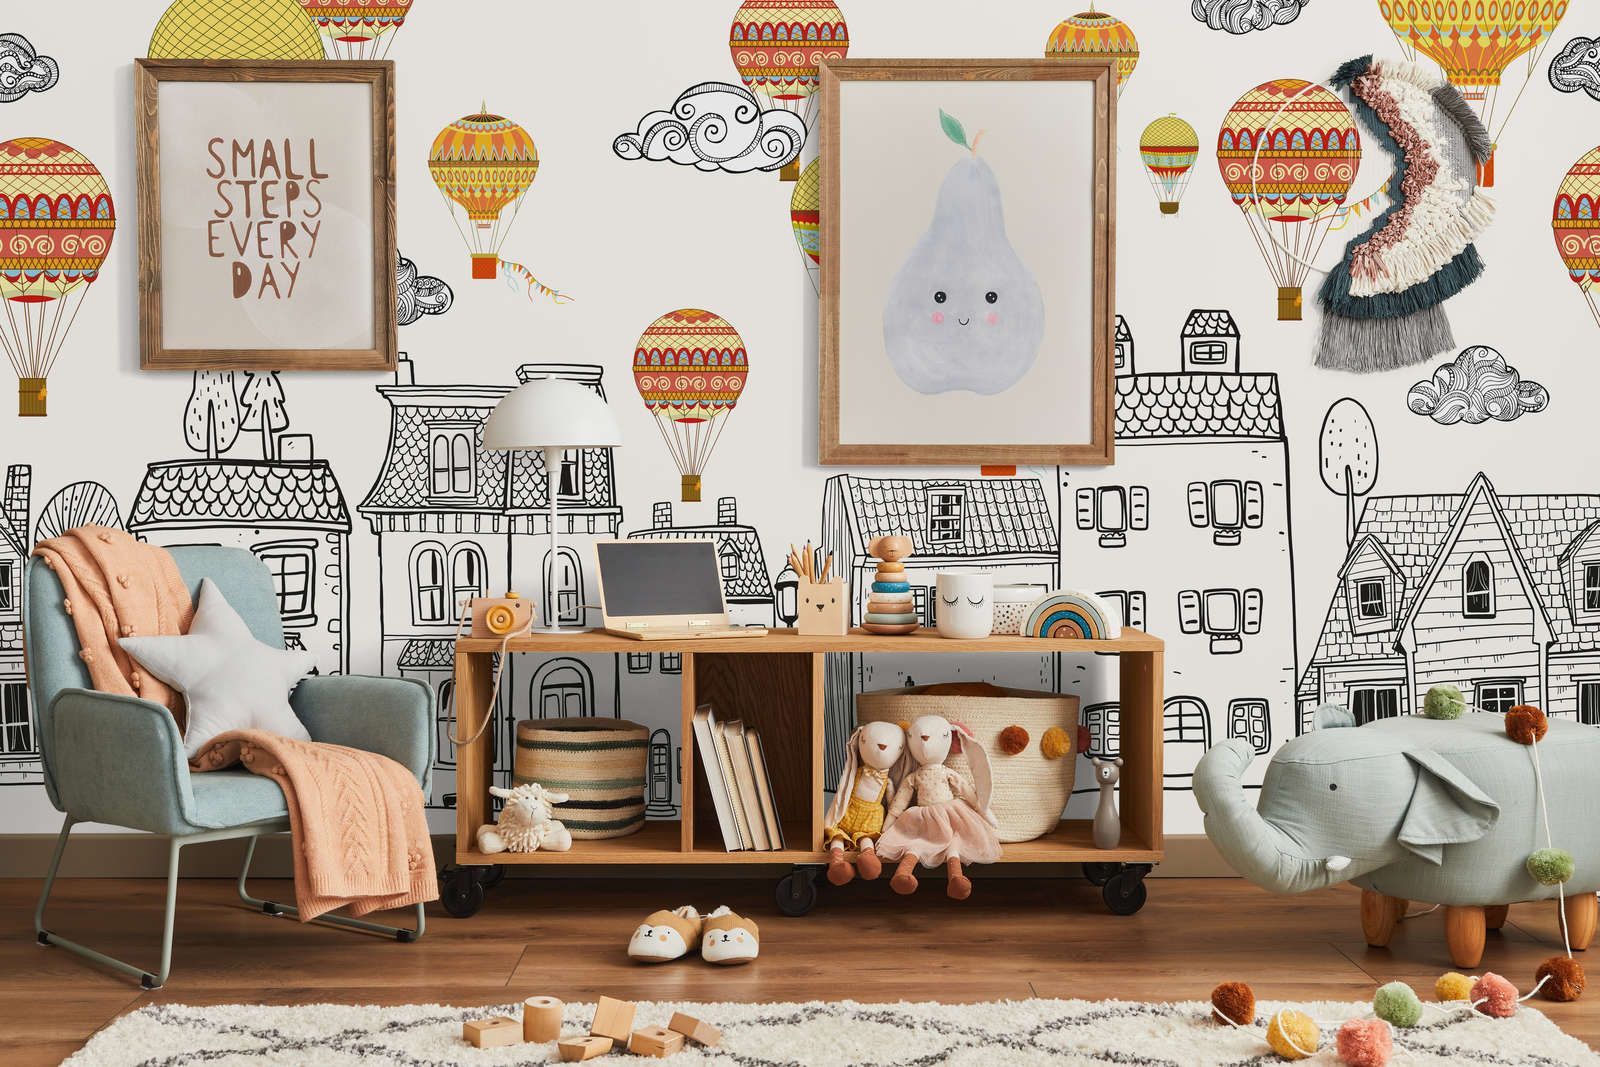             Small Town with Hot Air Balloons Wallpaper - Smooth & Matte Non-woven
        